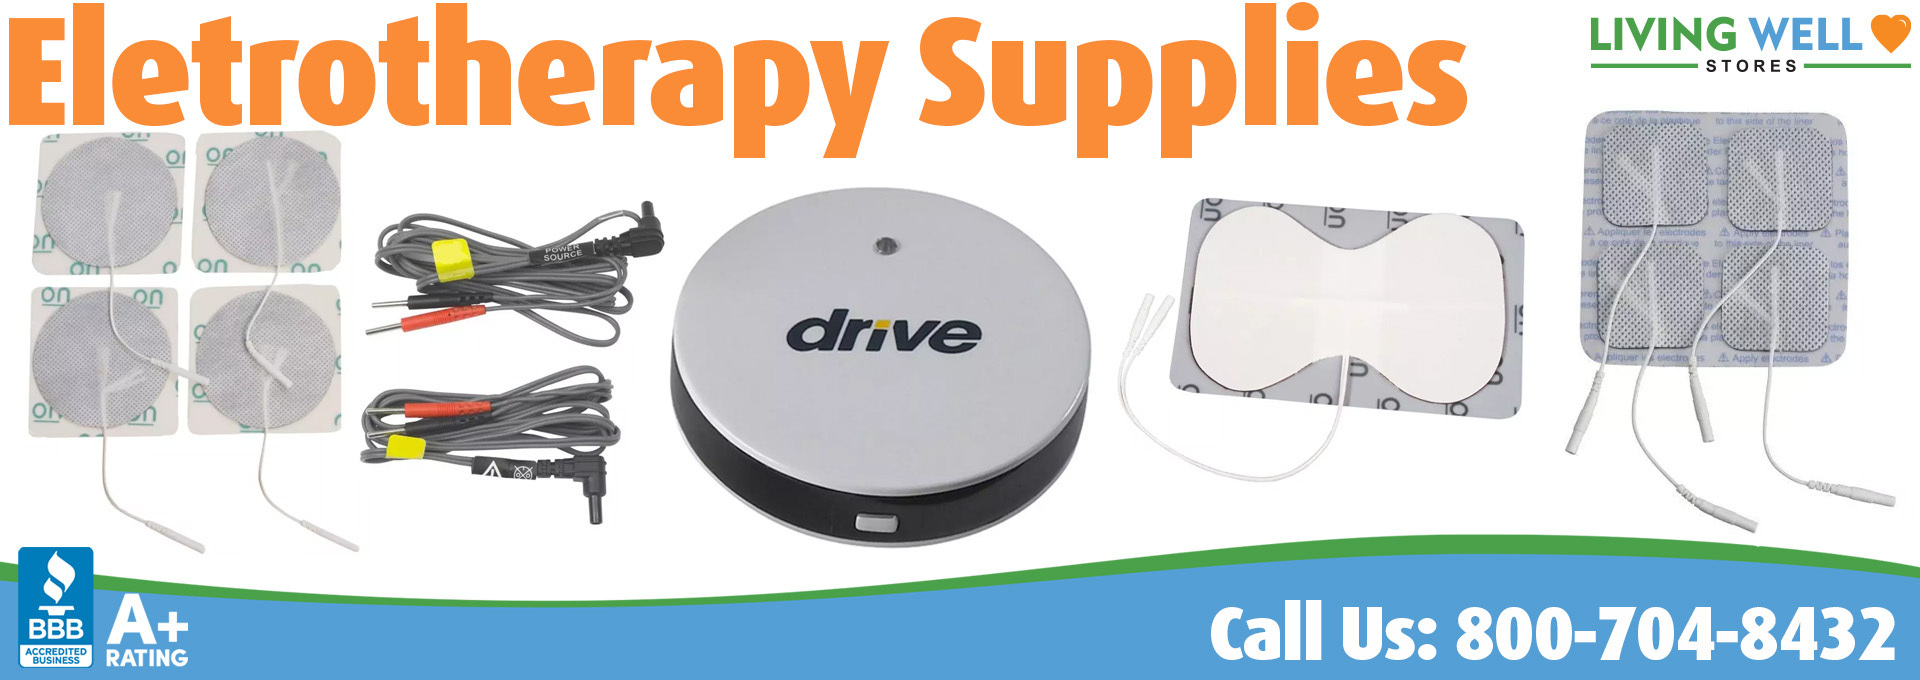 Living Well Stores: Electrotherapy Products and Supplies for Sale